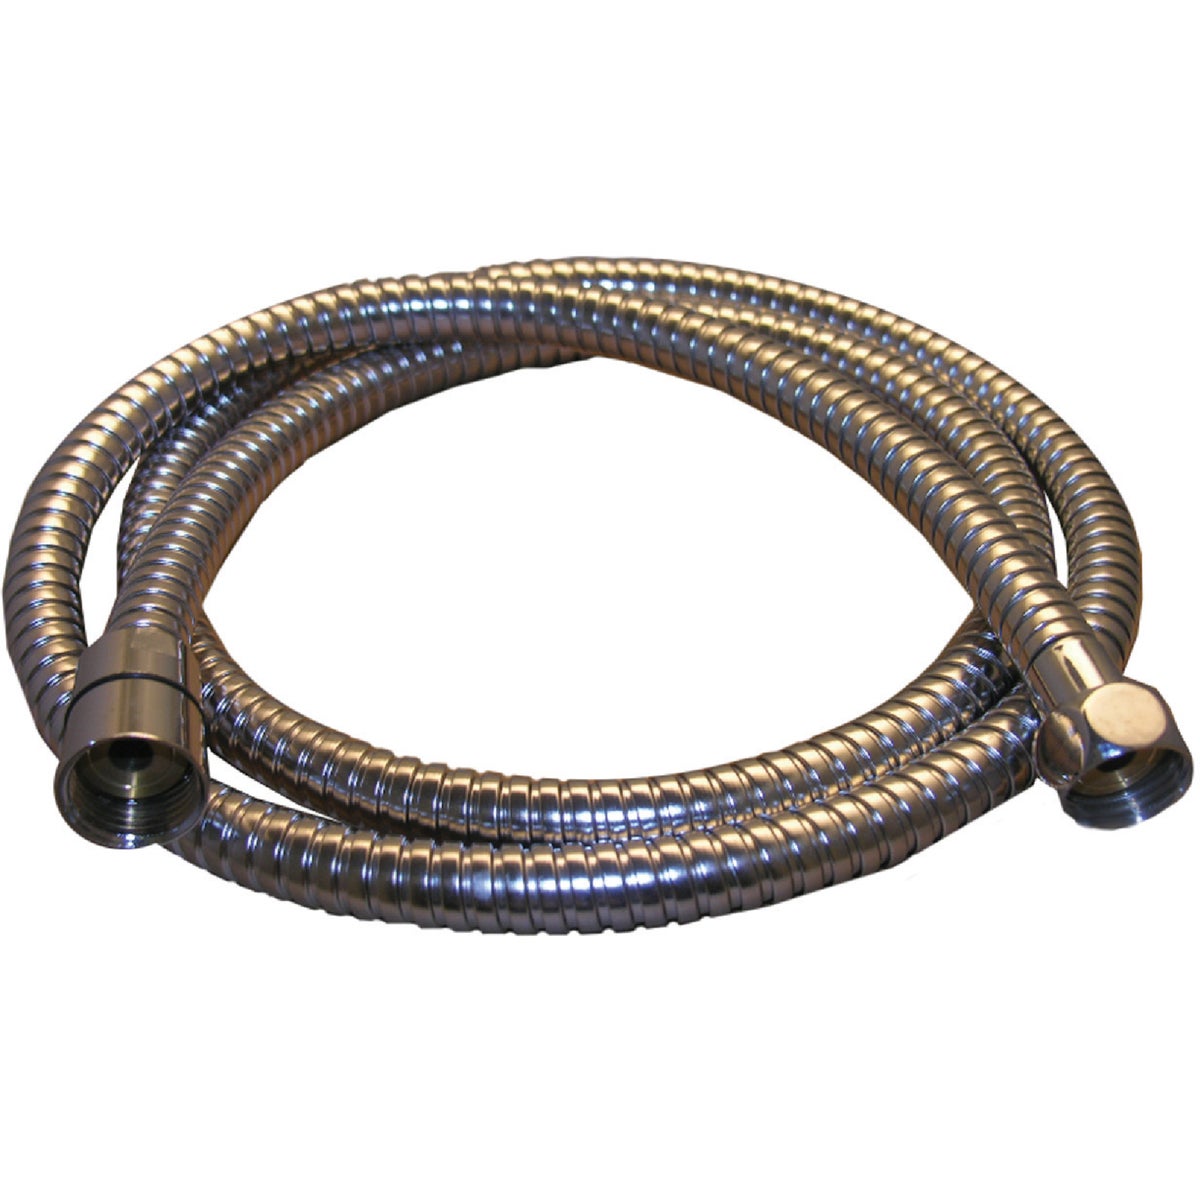 Lasco 59 In. Stainless Steel Shower Hose